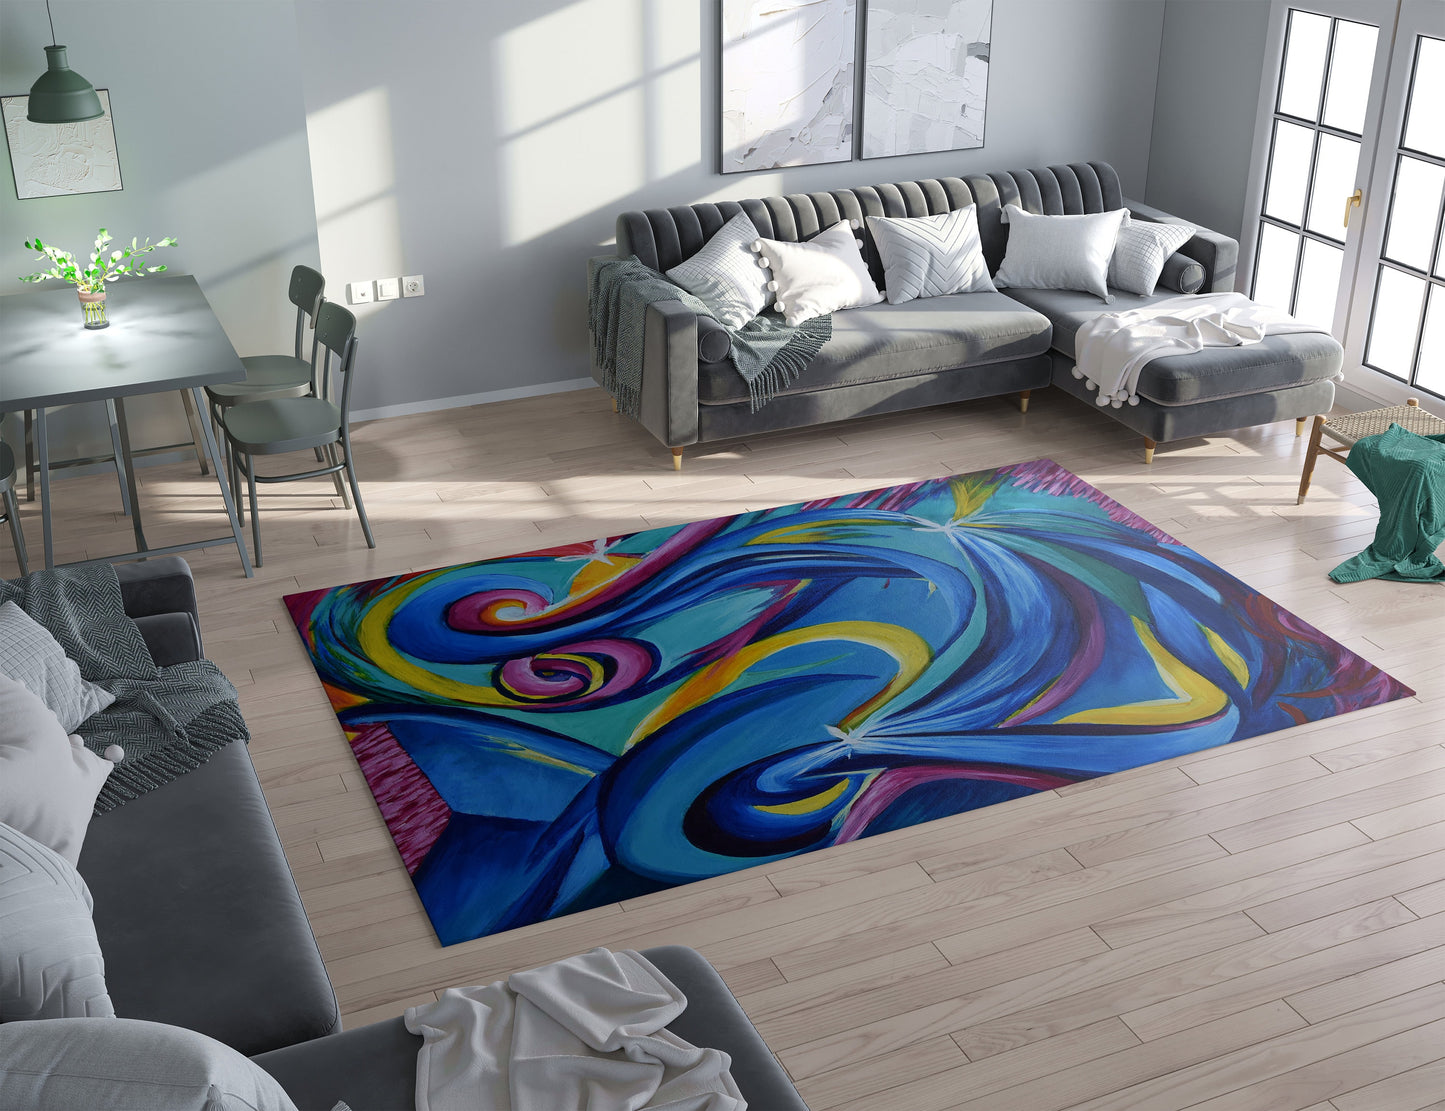 Colorful Abstract Rug Art Rug blue yellow pink Rug 3x5 4x6 5x7 8x10 Large rugs modern art